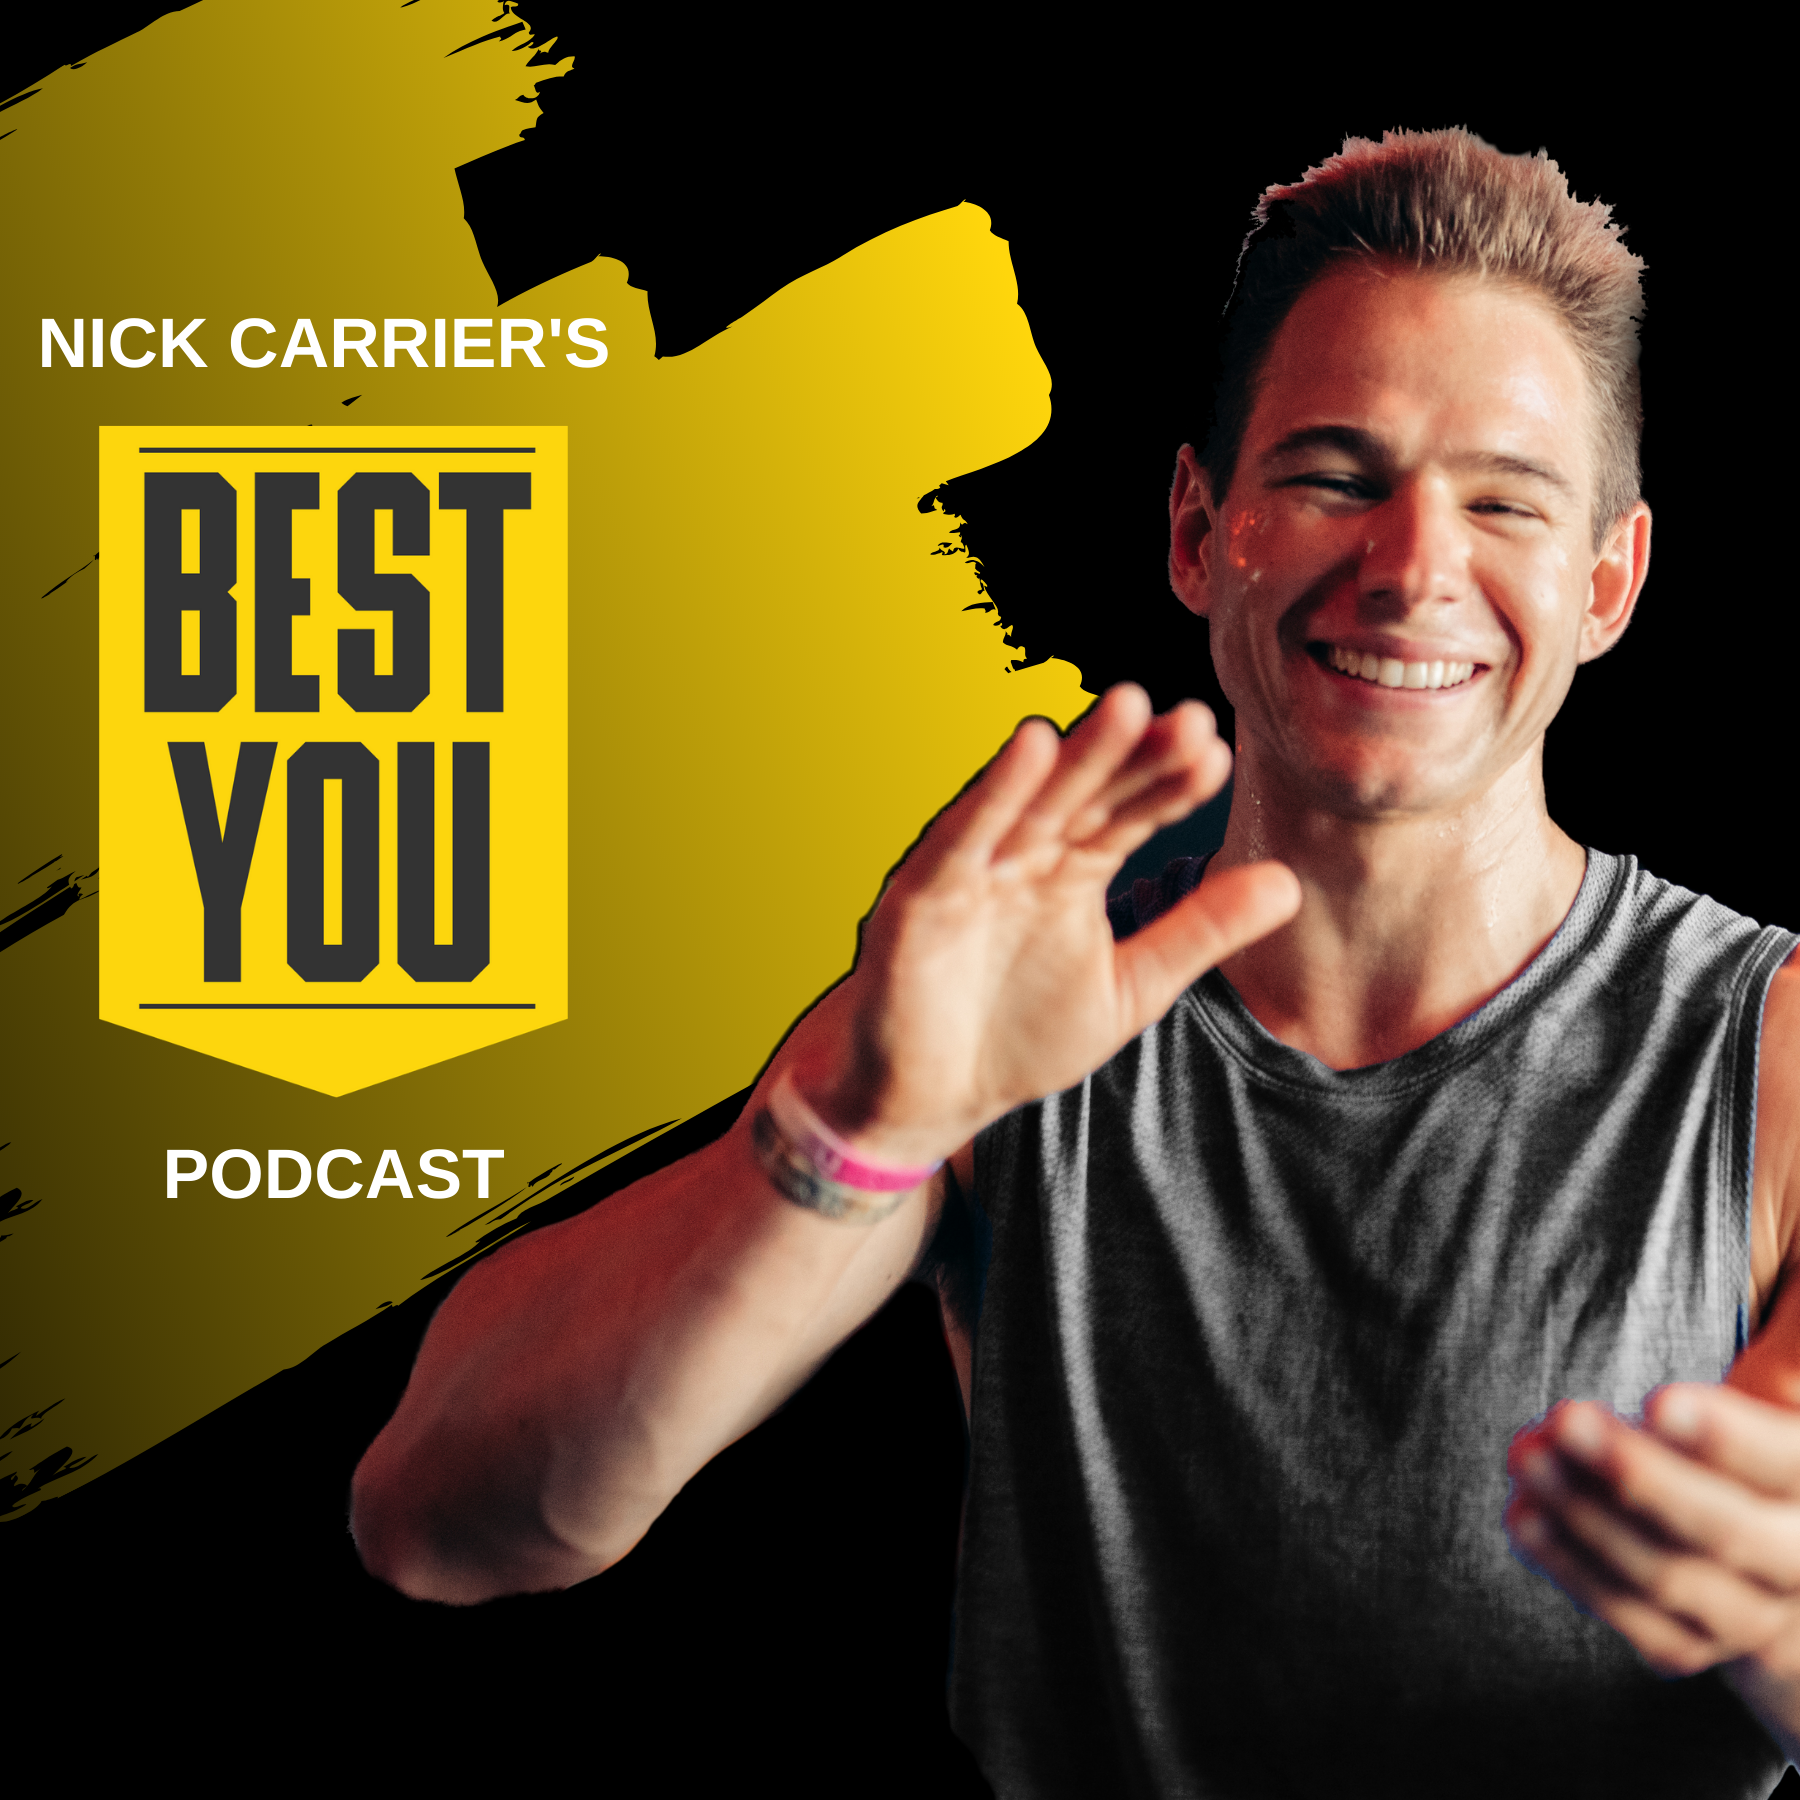 214. Nick's 3 Takeaways - There are NO SHORTCUTS!